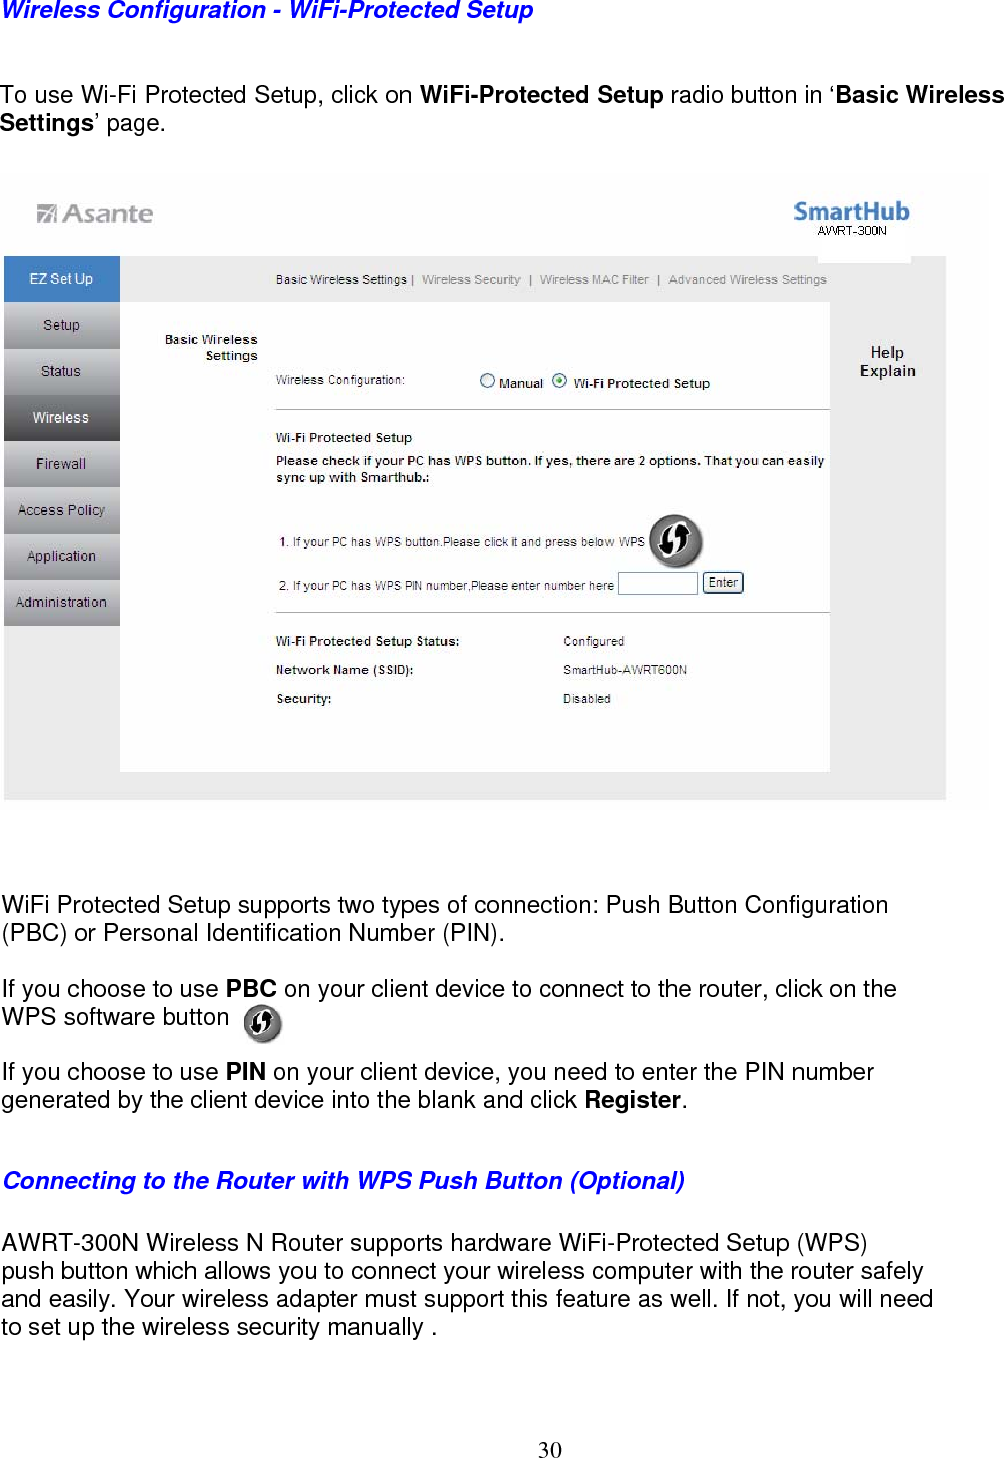  30Wireless Configuration - WiFi-Protected Setup To use Wi-Fi Protected Setup, click on WiFi-Protected Setup radio button in ‘Basic Wireless Settings’ page.                            WiFi Protected Setup supports two types of connection: Push Button Configuration  (PBC) or Personal Identification Number (PIN).  If you choose to use PBC on your client device to connect to the router, click on the  WPS software button .  If you choose to use PIN on your client device, you need to enter the PIN number generated by the client device into the blank and click Register.  Connecting to the Router with WPS Push Button (Optional) AWRT-300N Wireless N Router supports hardware WiFi-Protected Setup (WPS) push button which allows you to connect your wireless computer with the router safely  and easily. Your wireless adapter must support this feature as well. If not, you will need  to set up the wireless security manually .   